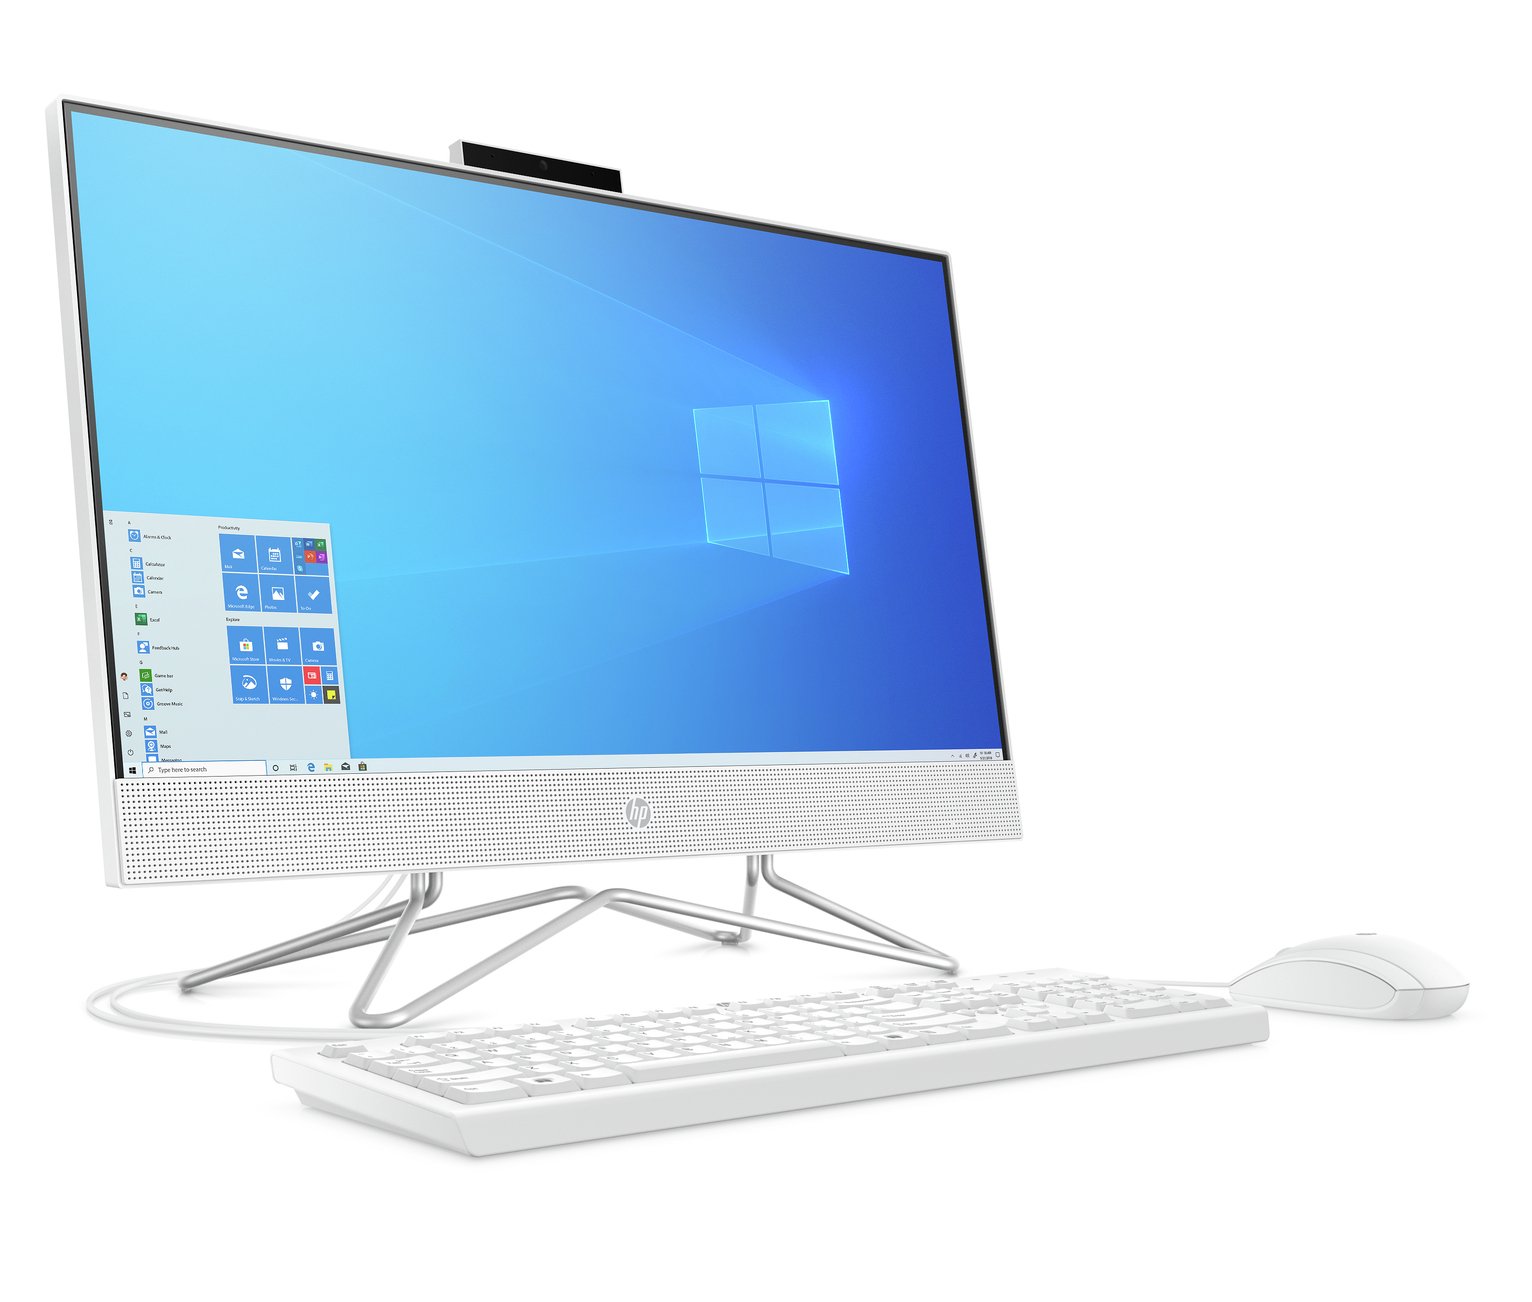 HP 24in Pentium 4GB 1TB All-in-One PC Review